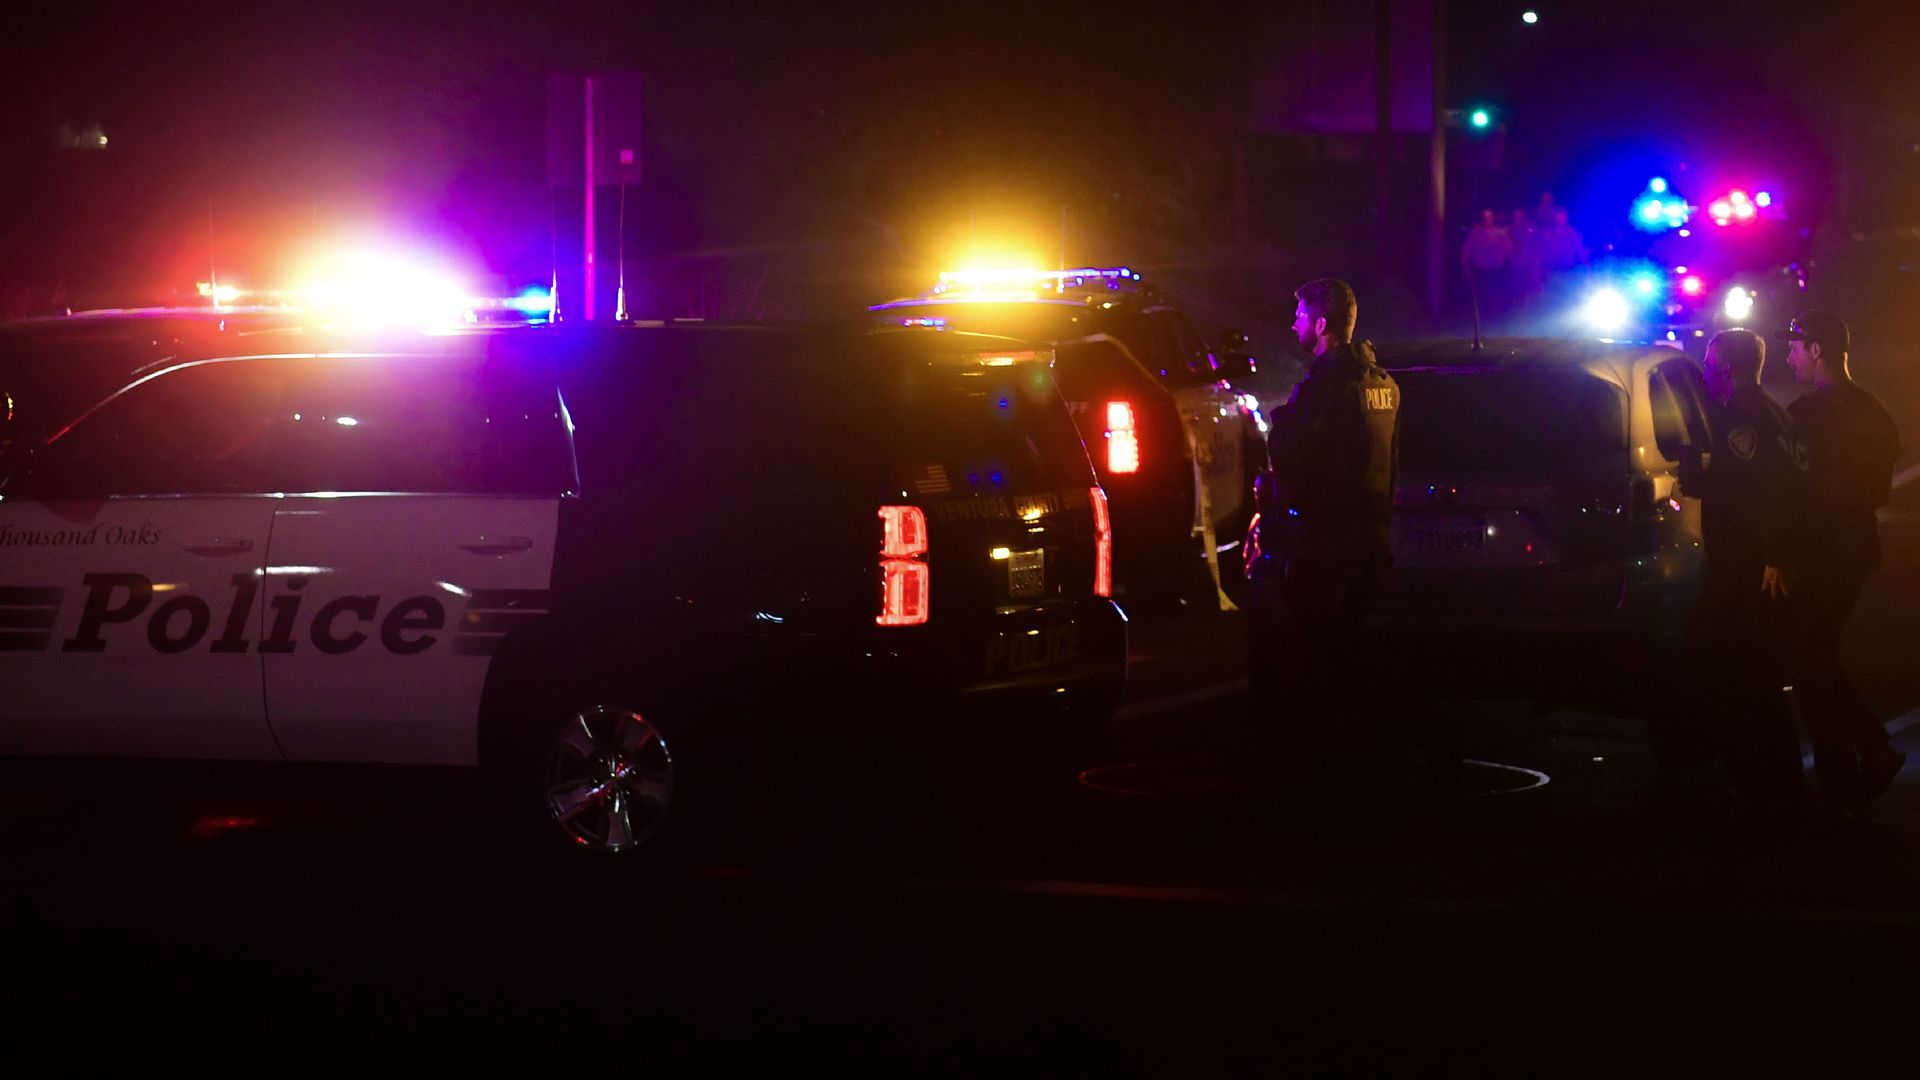 Police officers vehicles close off an area responding to a shooting at a bar in Thousand Oaks, California on November 8, 2018.